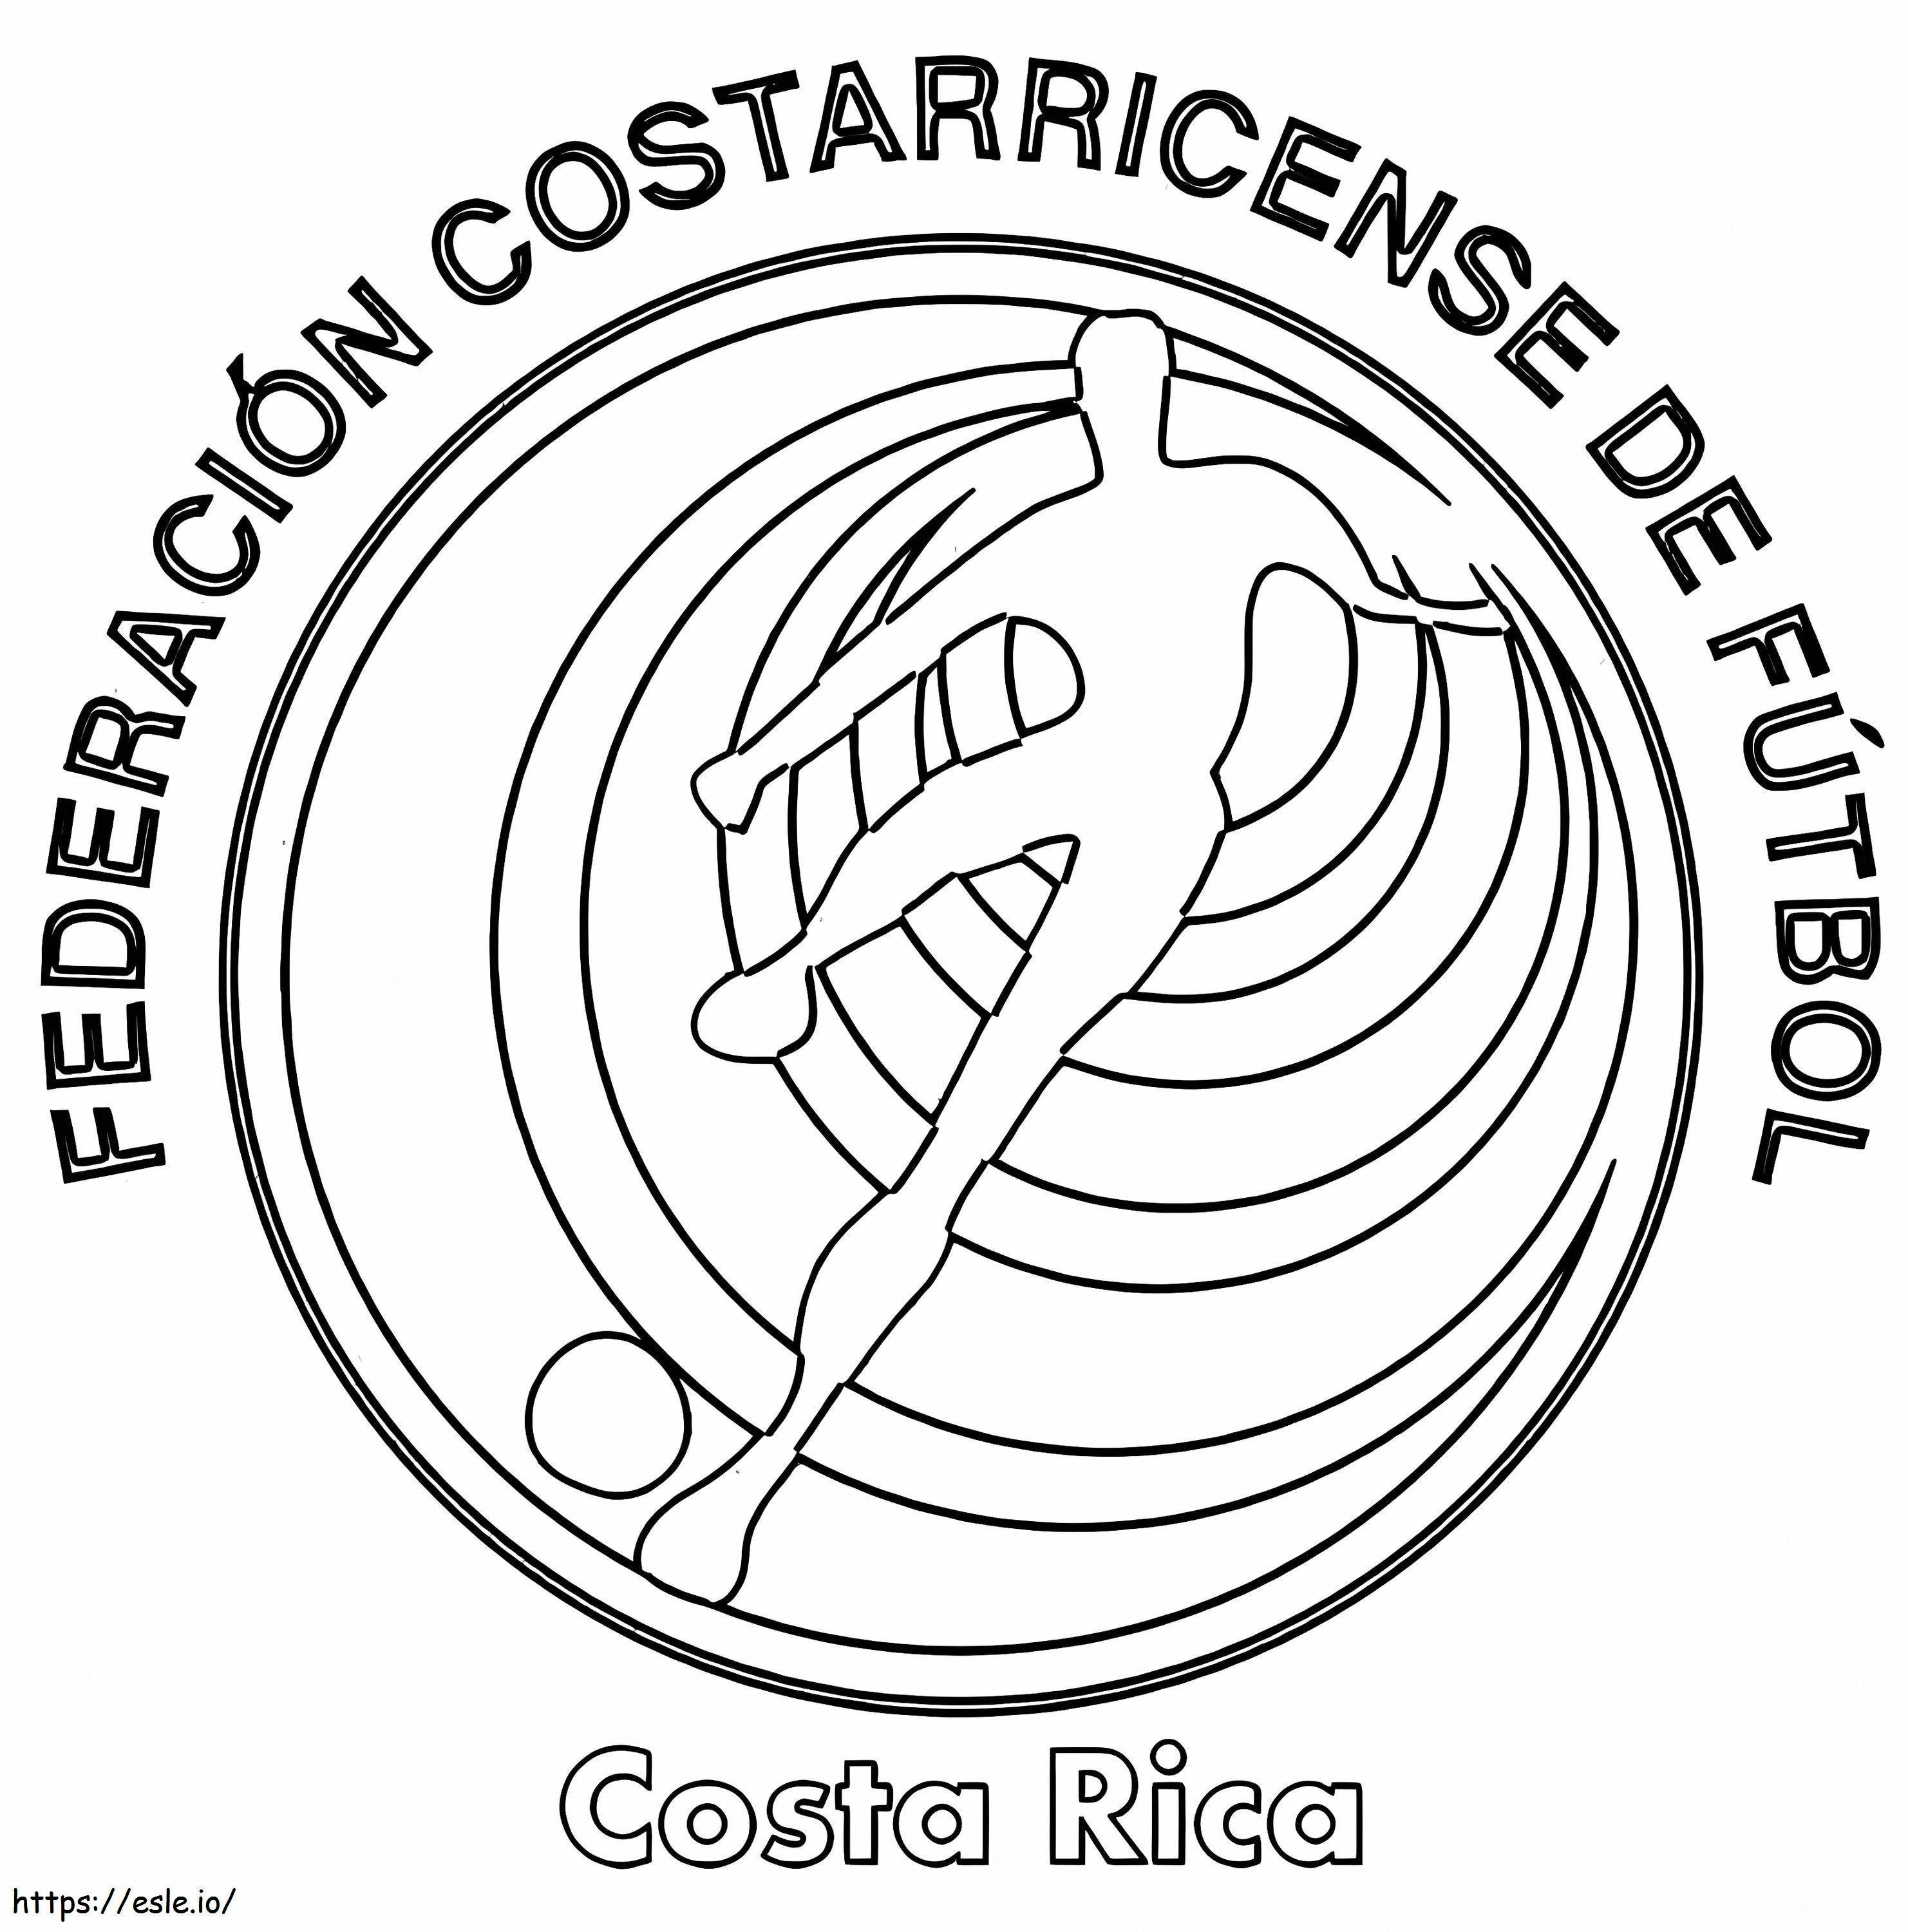 Costa Rica National Football Team coloring page